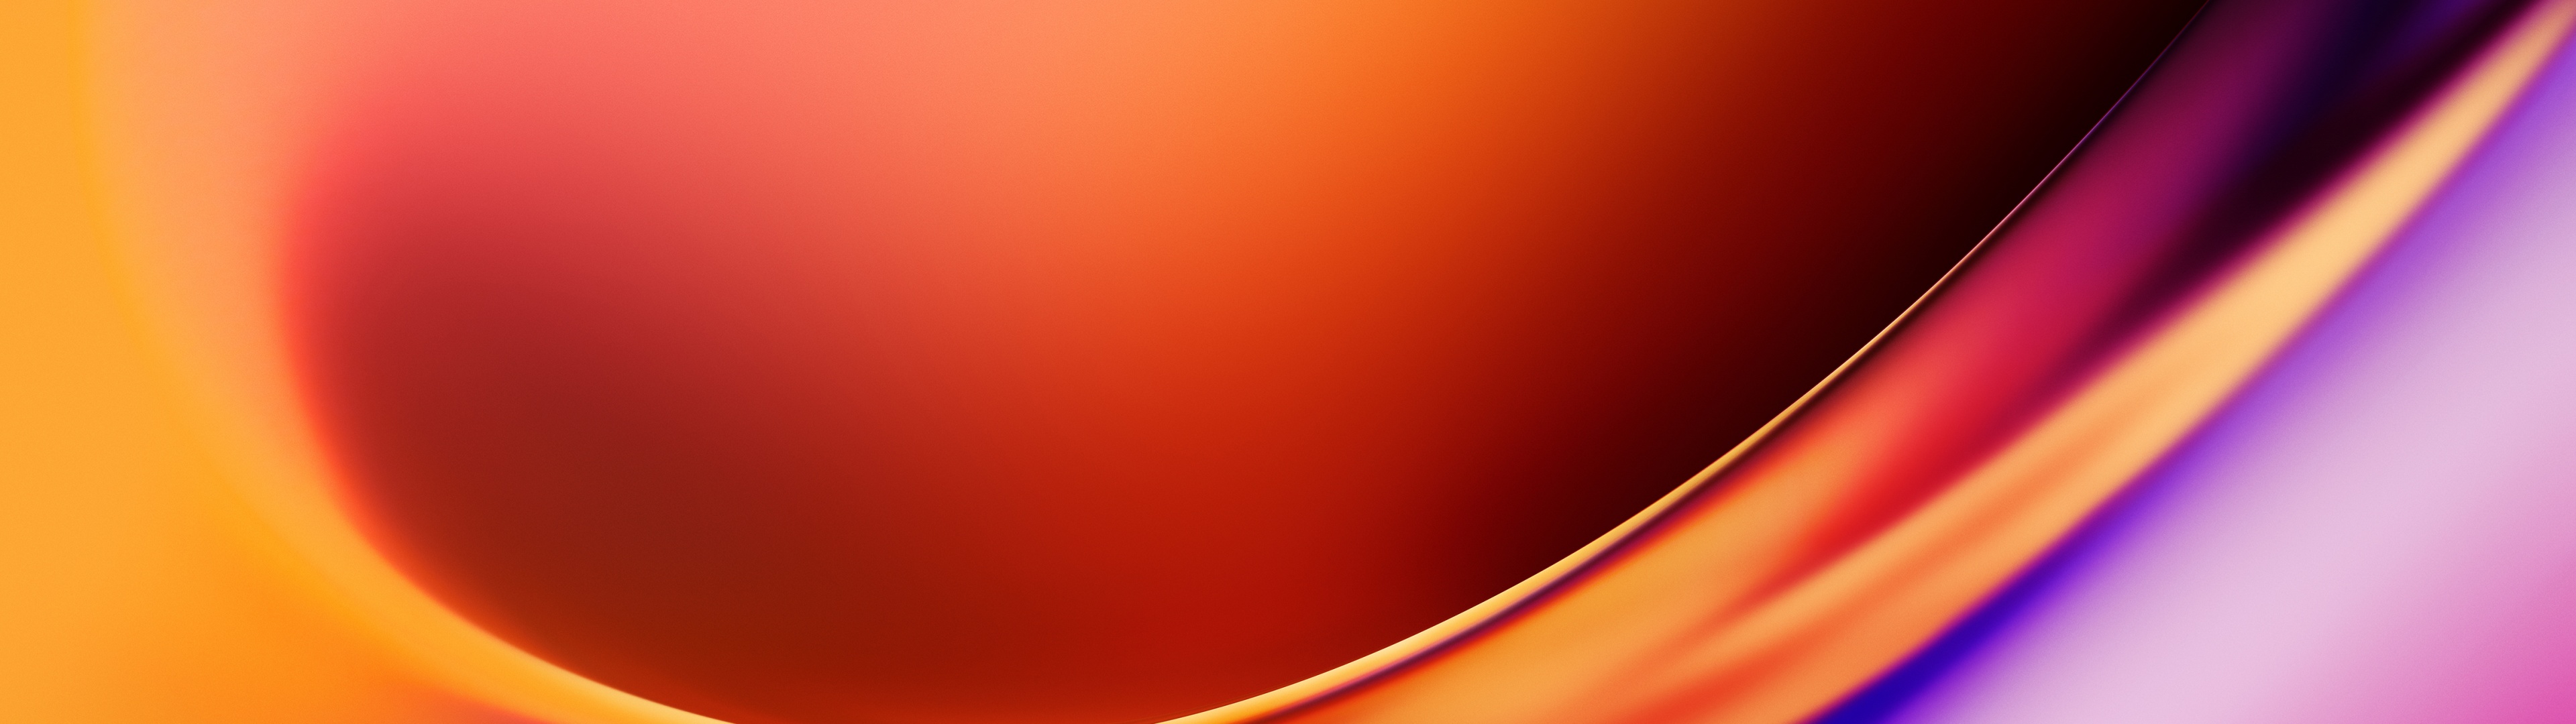 Oneplus 8 Pro Wallpaper 4k Stock 2020 Abstract 518